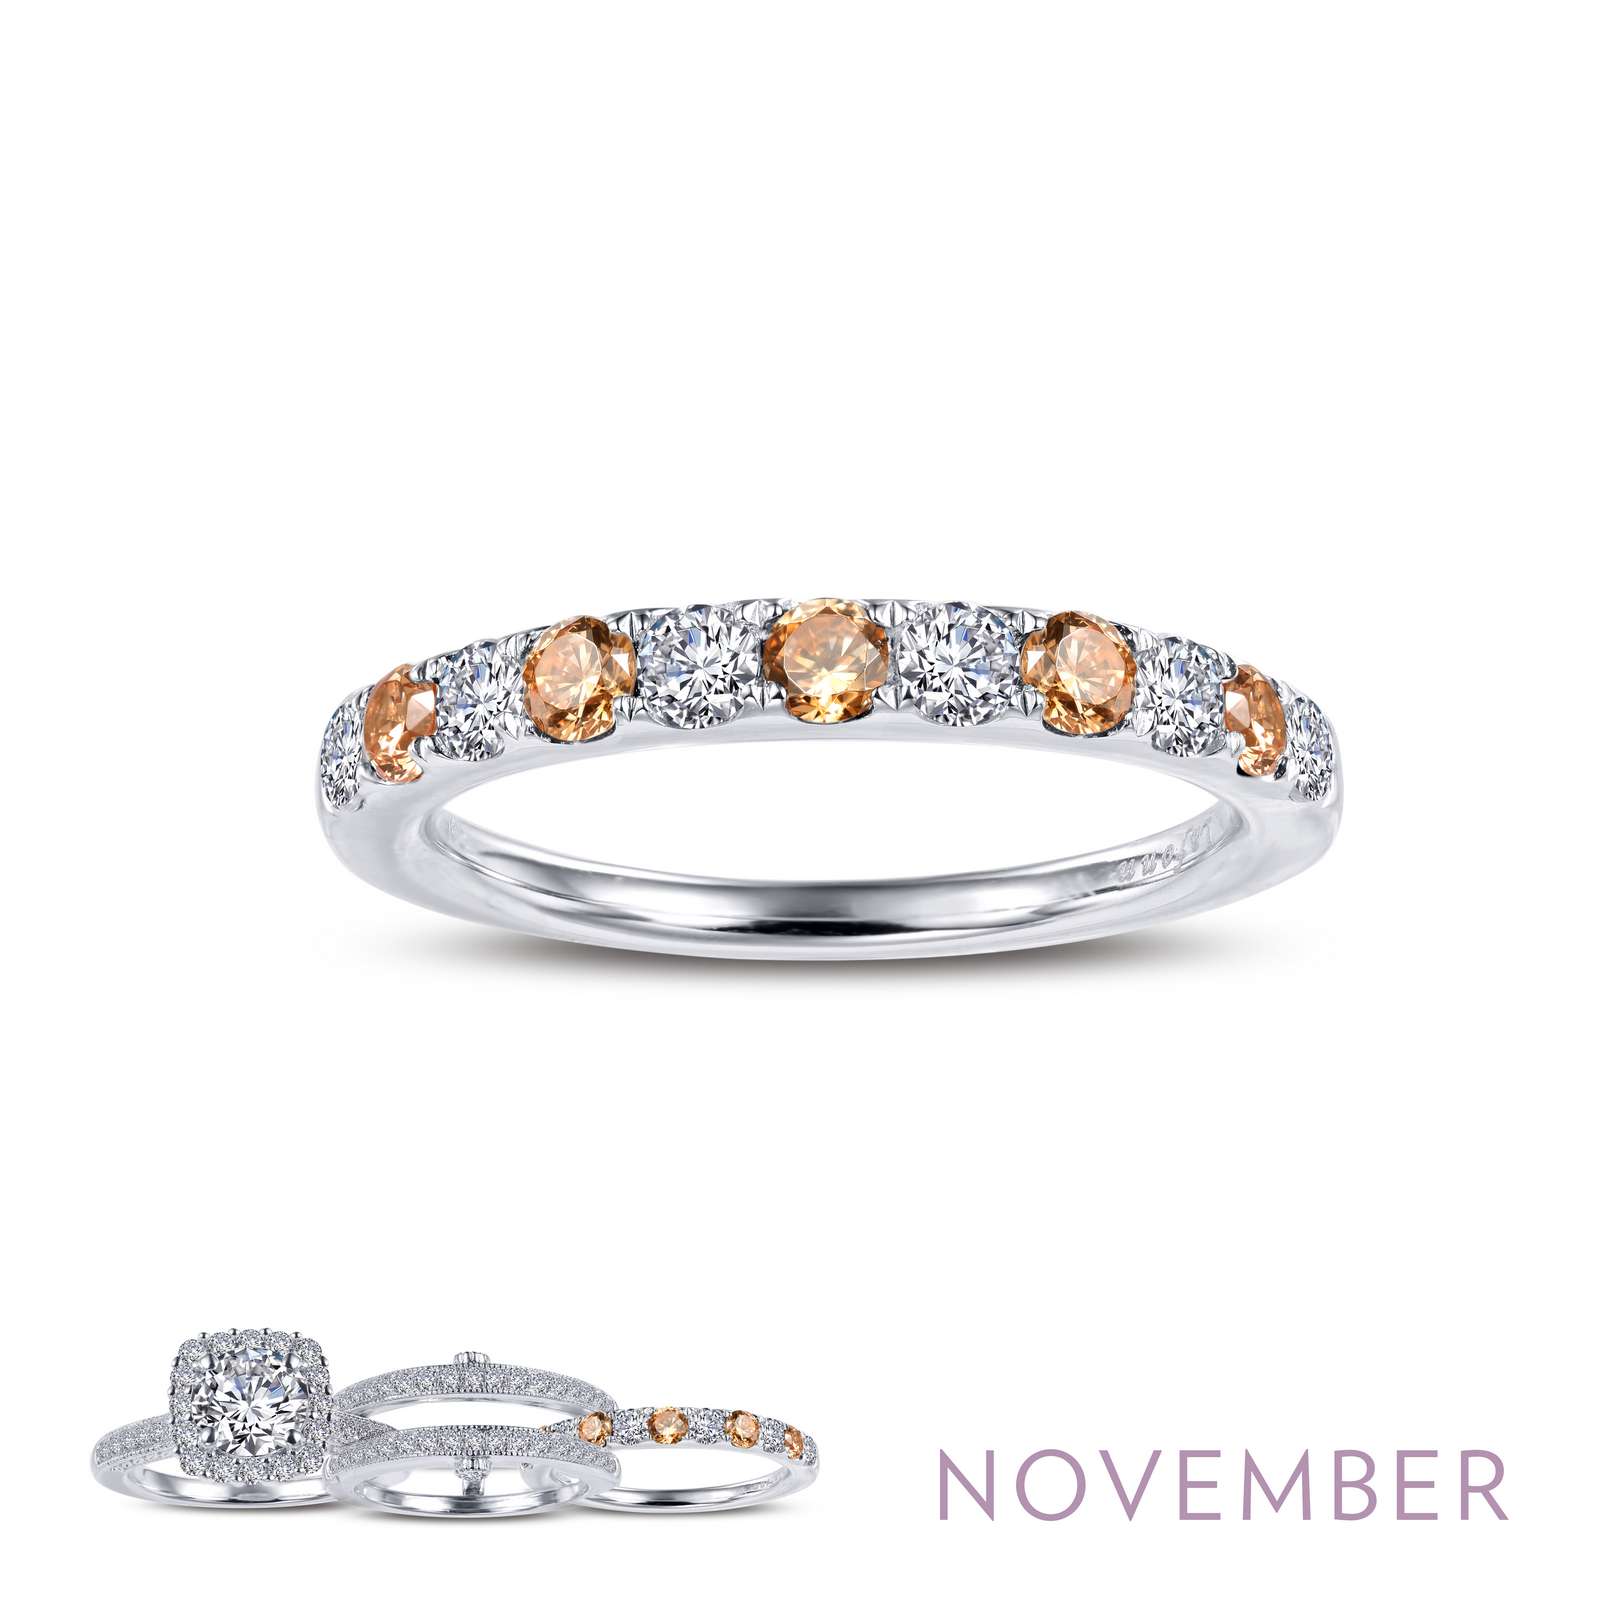 November Birthstone Ring Griner Jewelry Co. Moultrie, GA